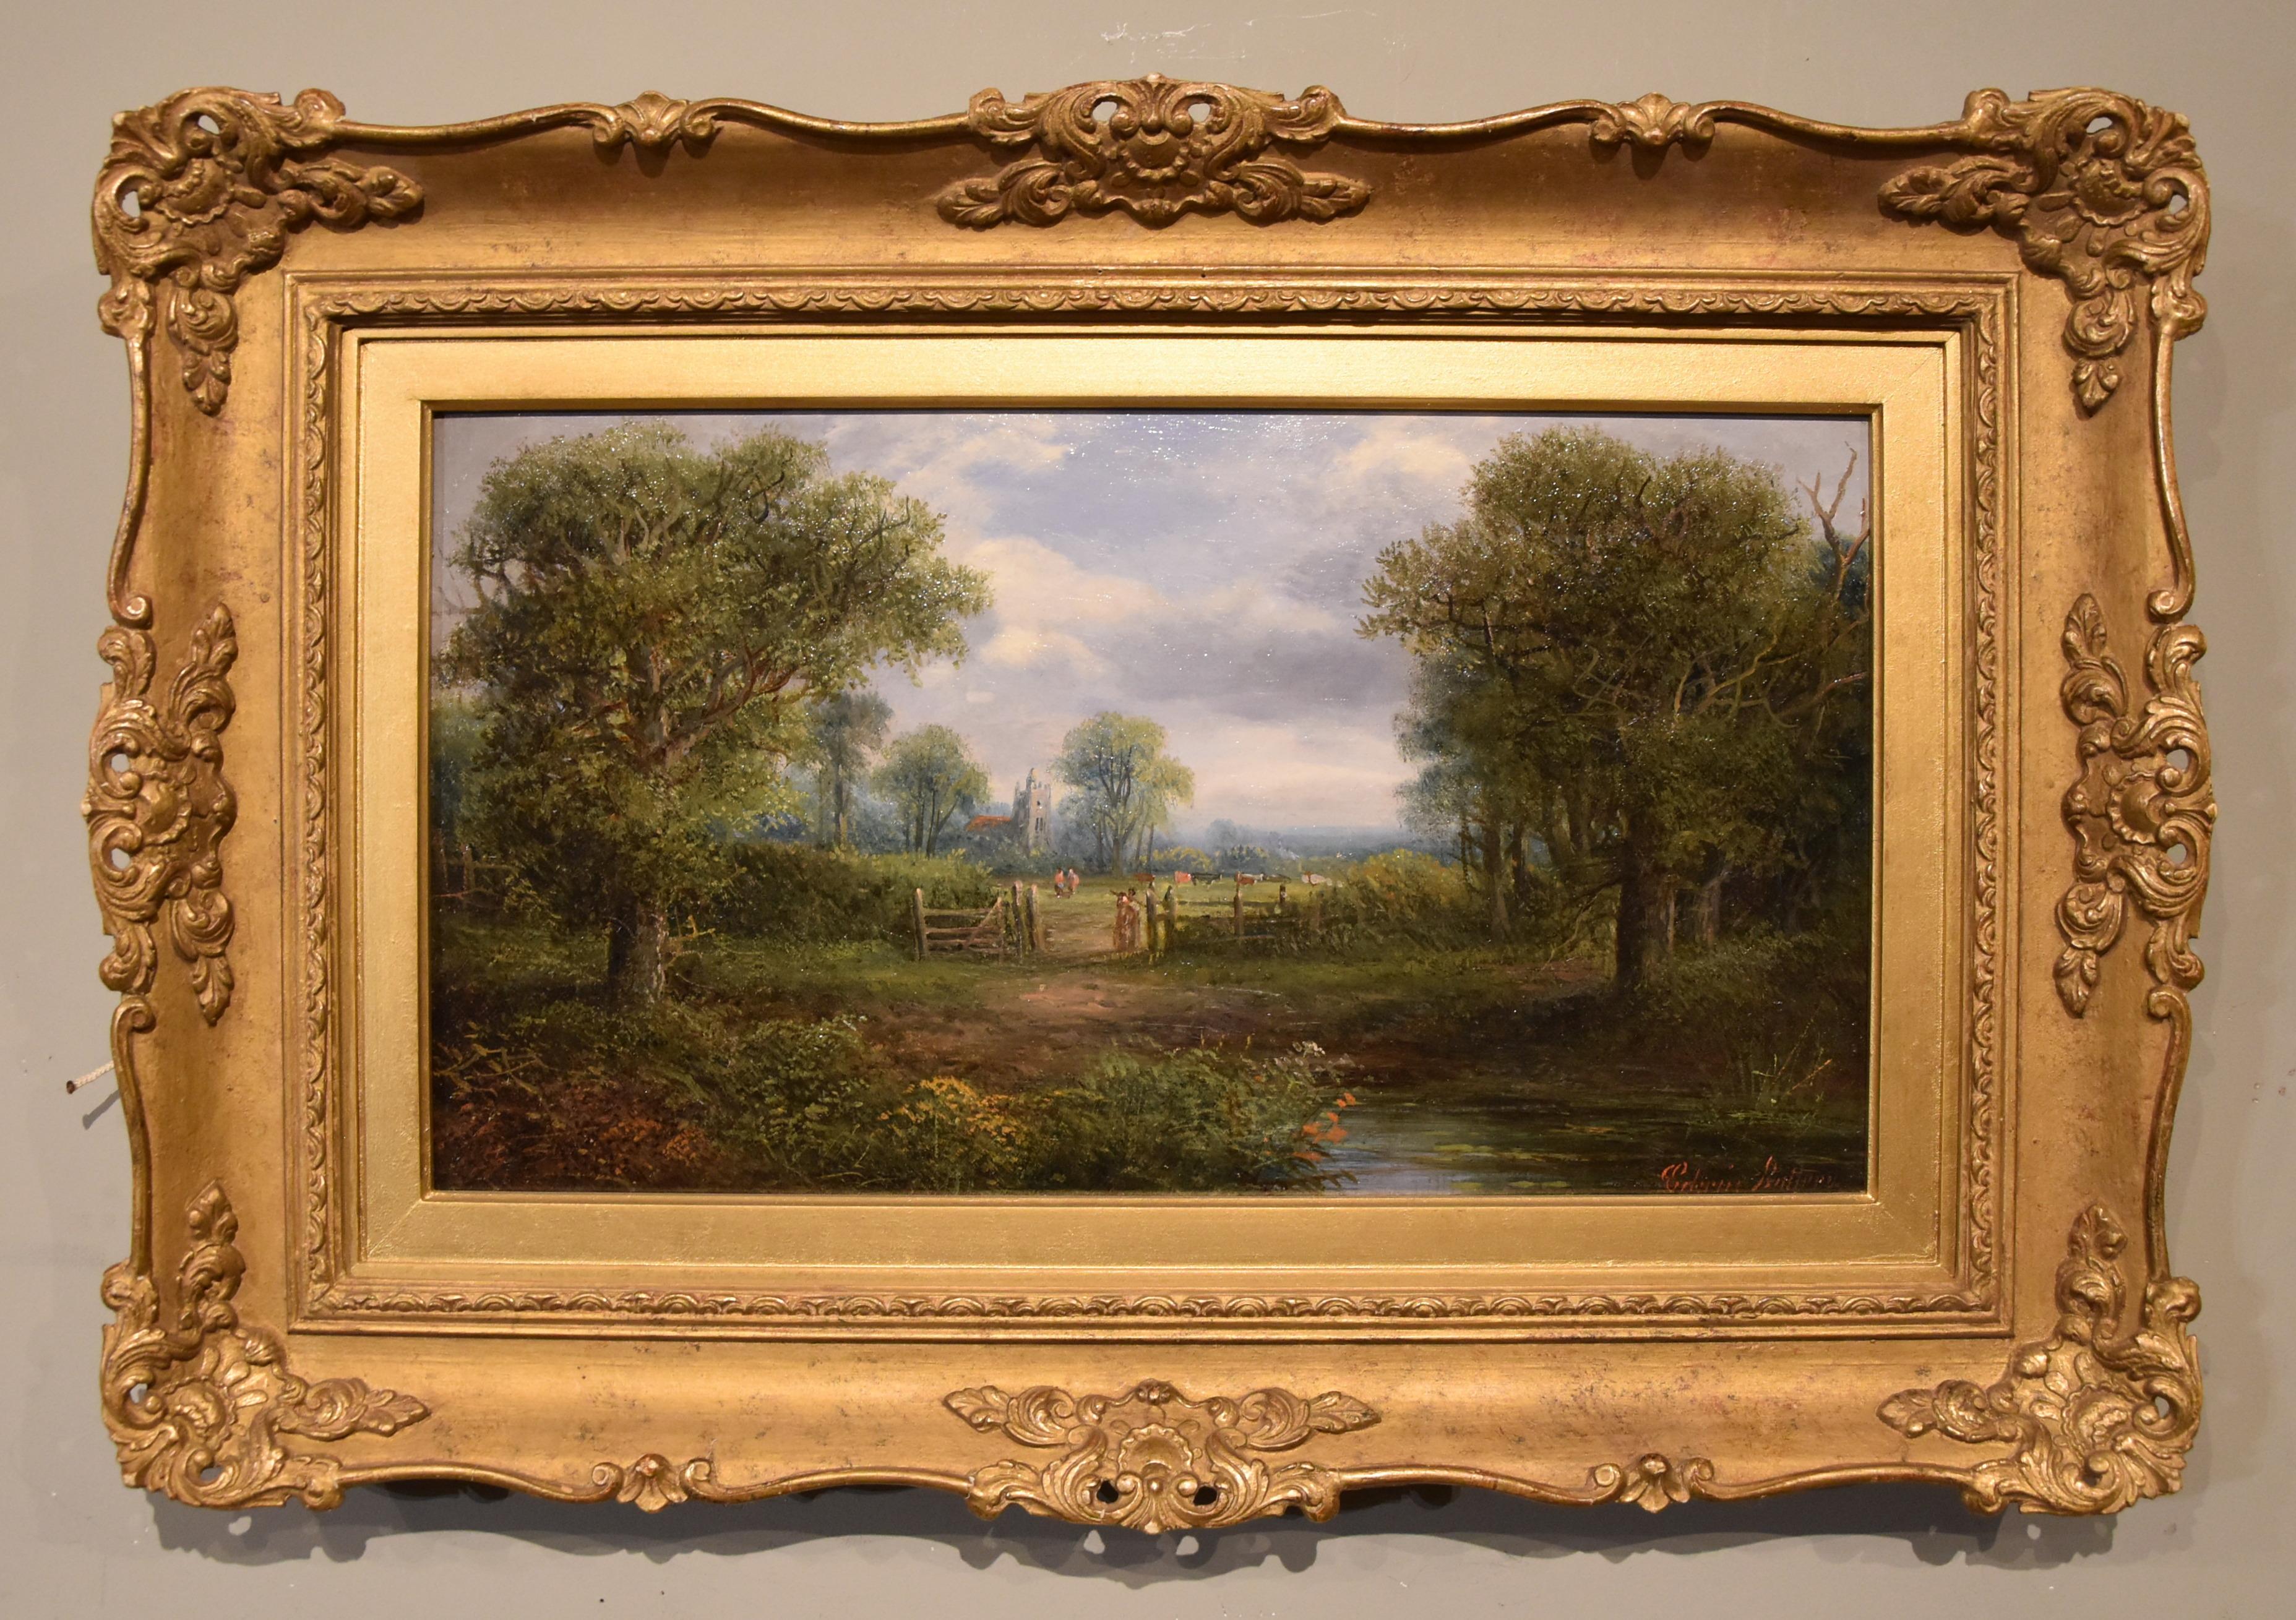 Oil Painting by Edwin Buttery "The Path between the Villages"  Flourished 1849- 1895  Painter of English rural views. Oil on canvas. In fine original frame. Signed 

Dimensions framed 17 x 24.5inches

All of the items that we advertise for sale have